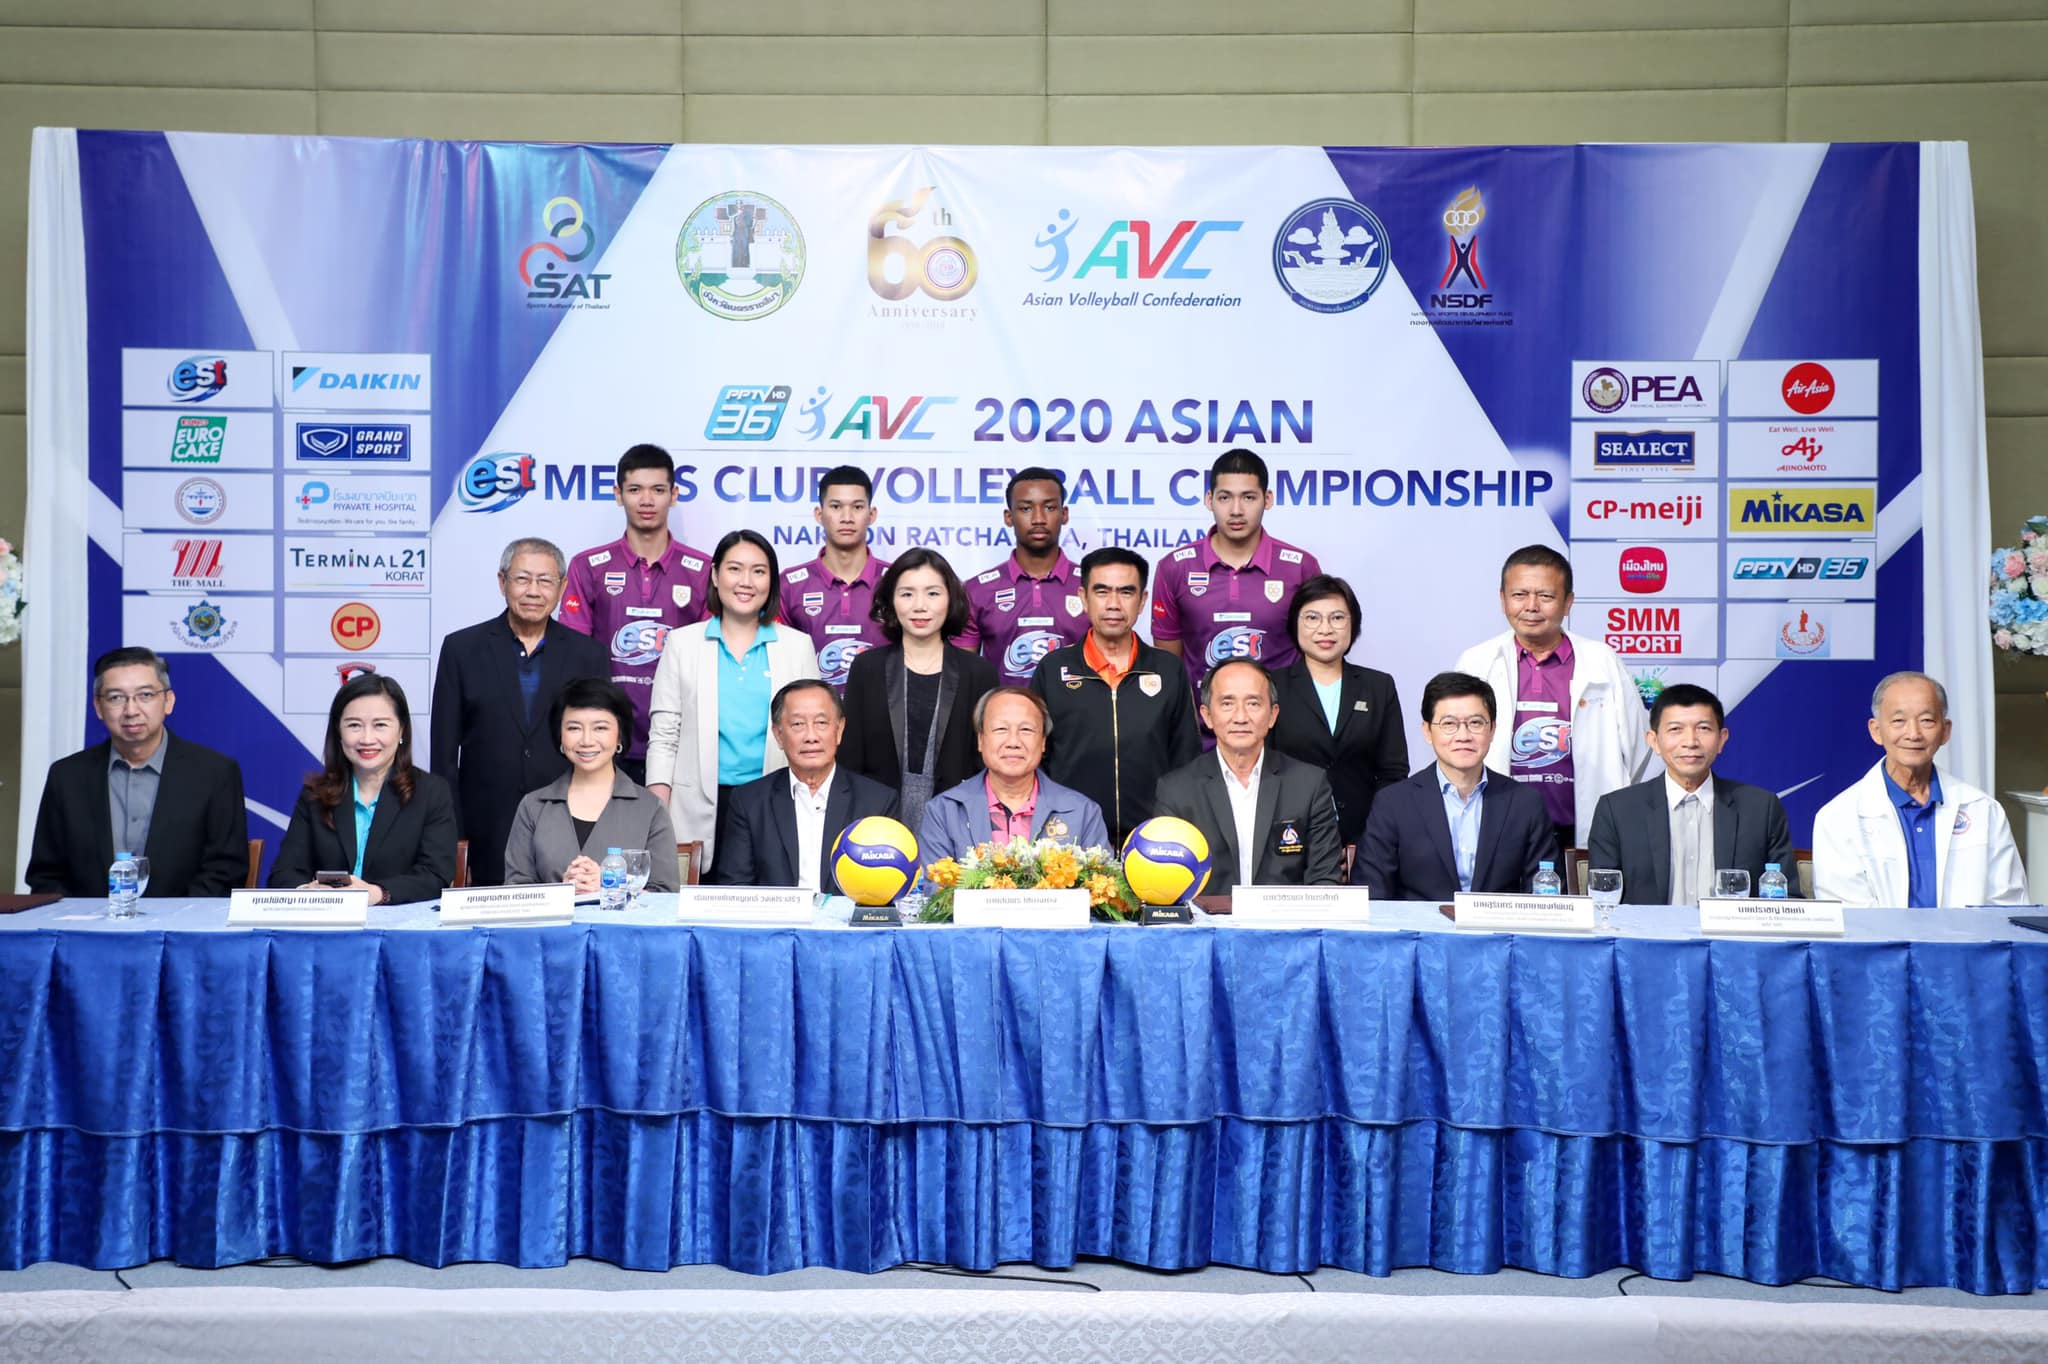 THAILAND WELL-PREPARED TO HOST ASIAN MEN’S CLUB CHAMPIONSHIP IN NAKHON RATCHASIMA FIRST TIME IN 20 YEARS